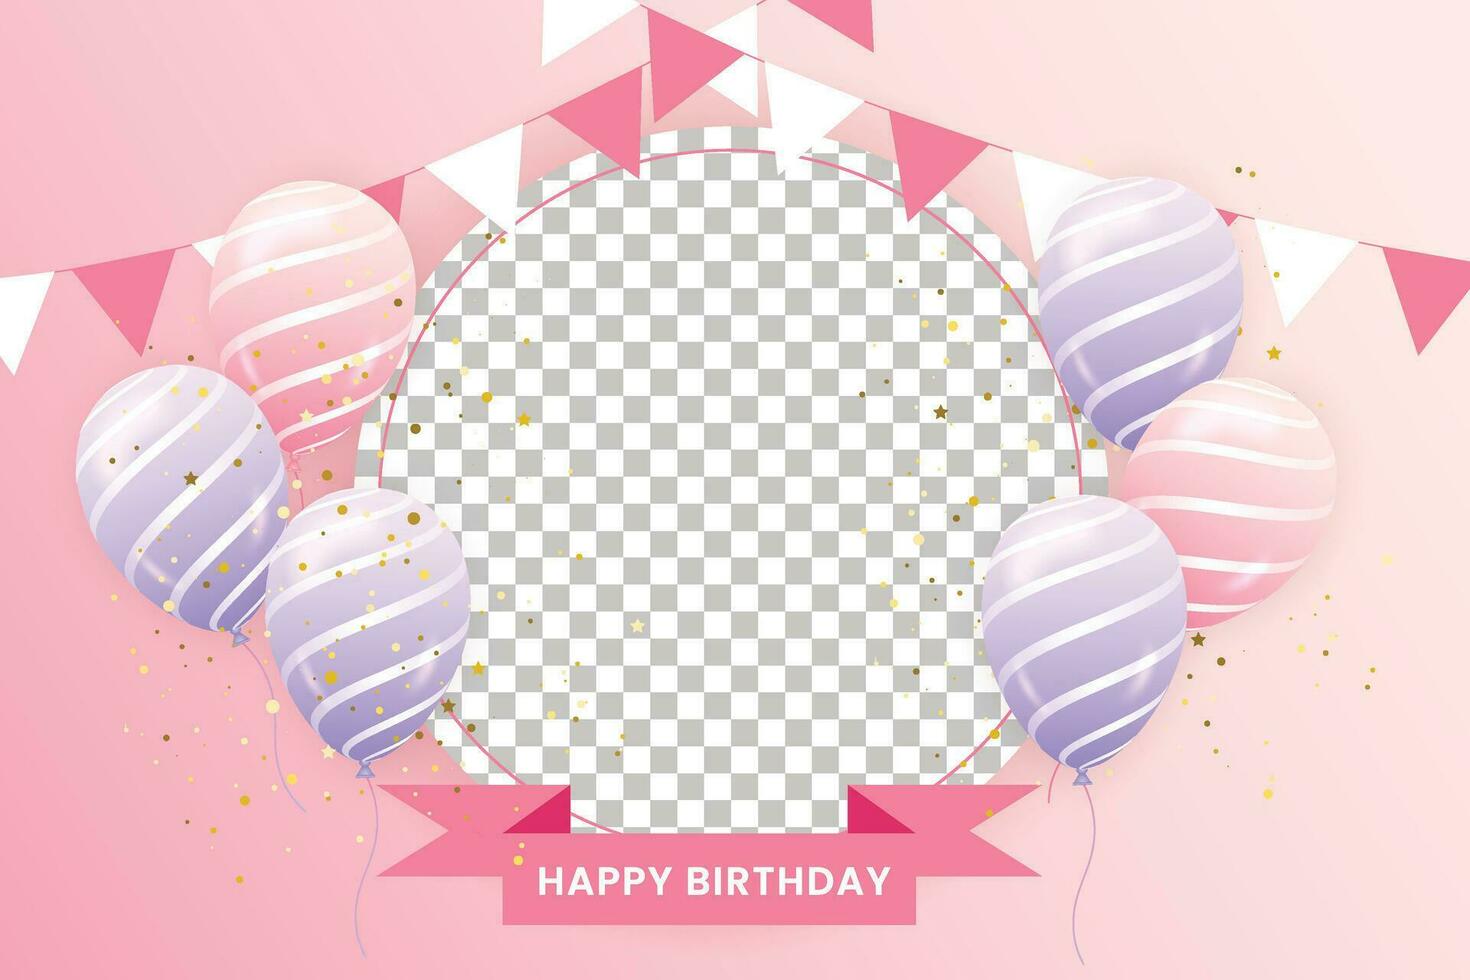 Birthday wish template with realistic pink and purple   balloons set  Birthday background with realistic balloons and birthday  frame vector